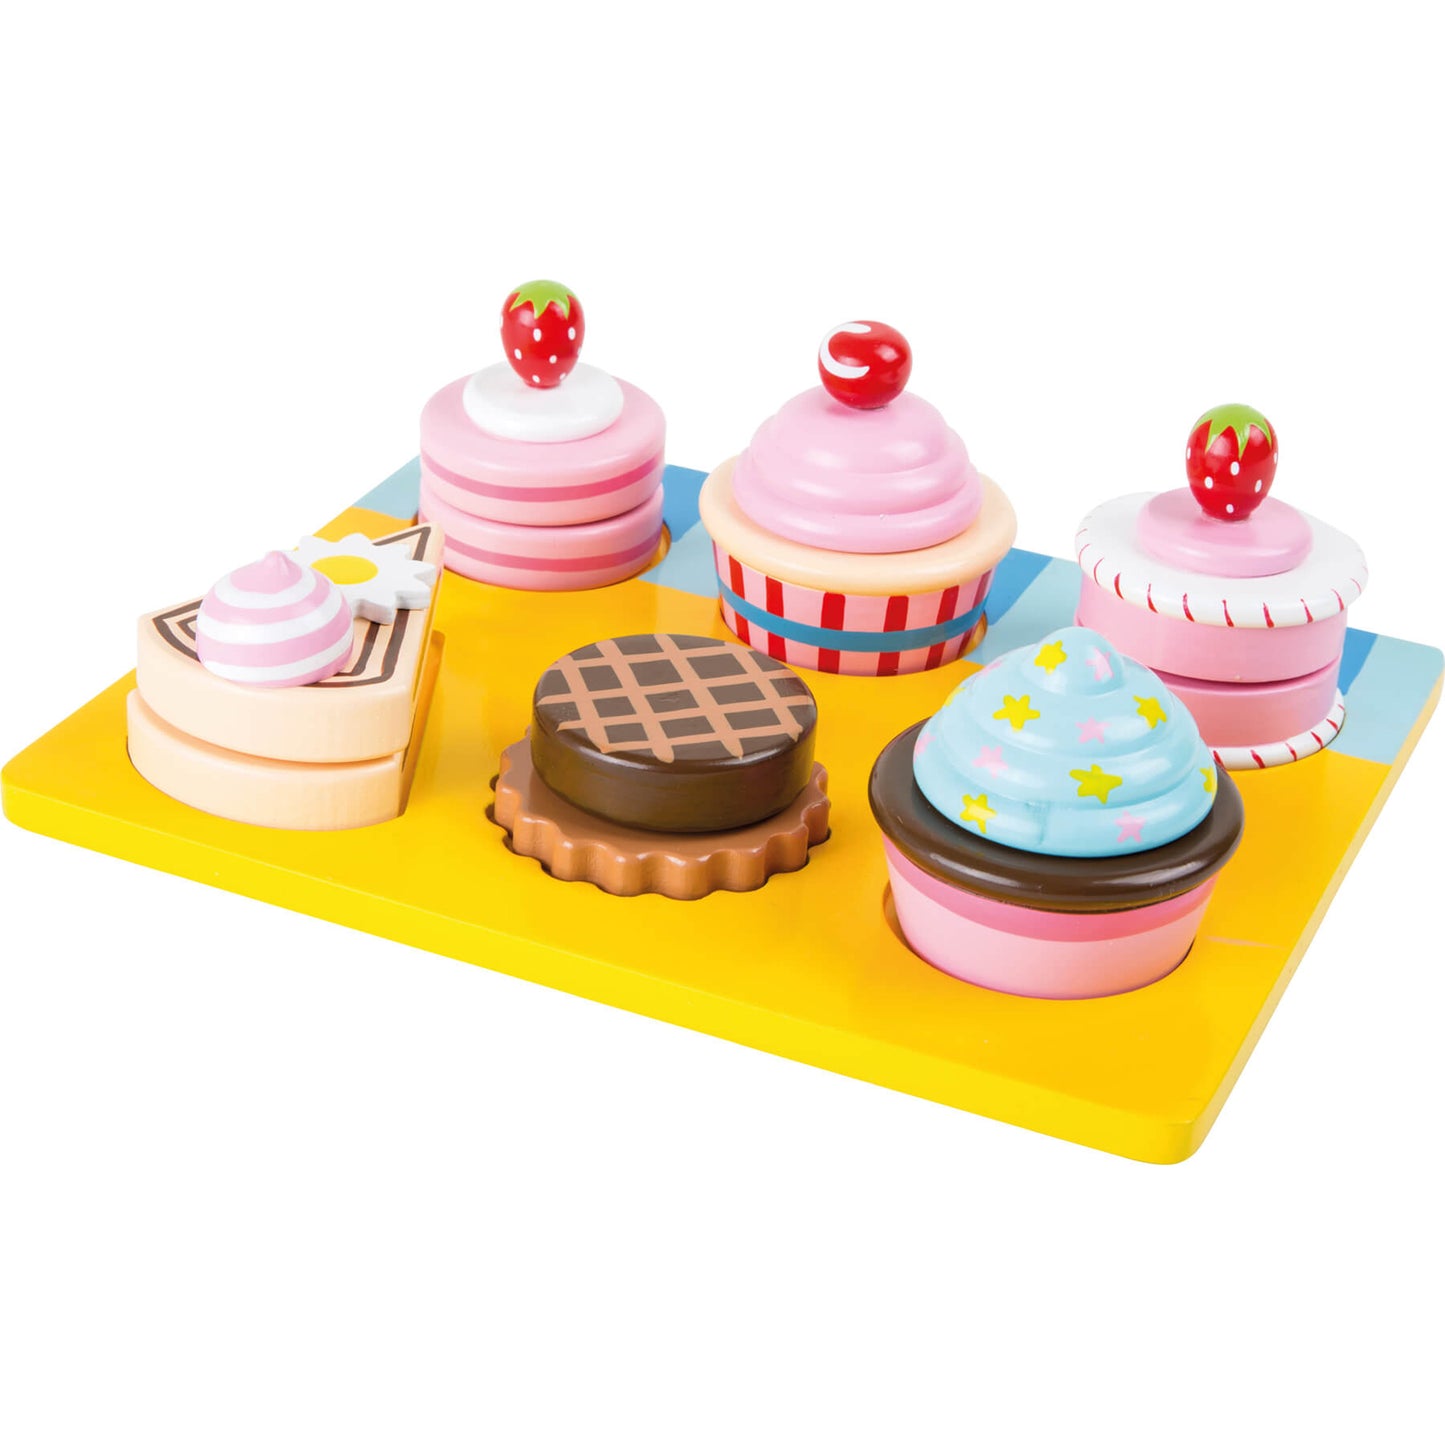 Cupcakes And Cakes Cutting Set